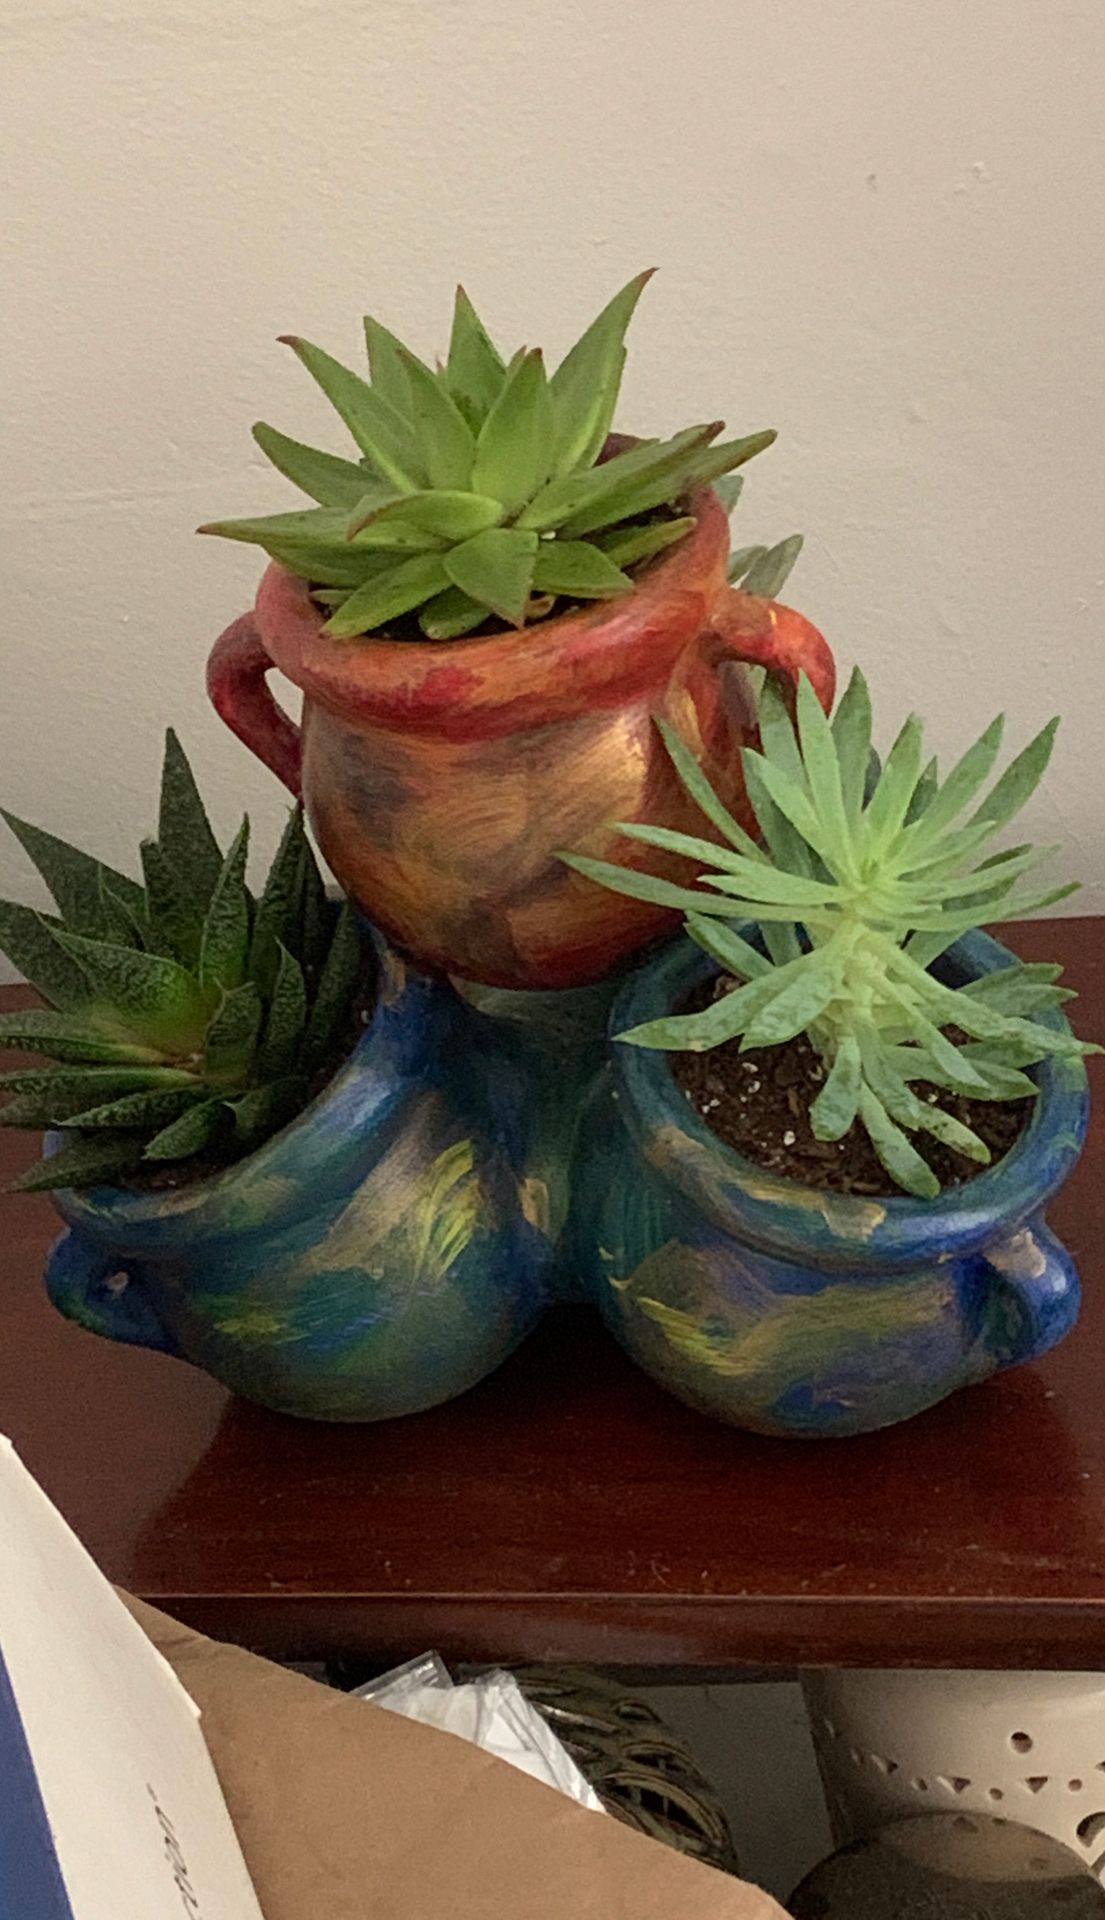 4giant succulents in A Handmade & painted ceramic pottery